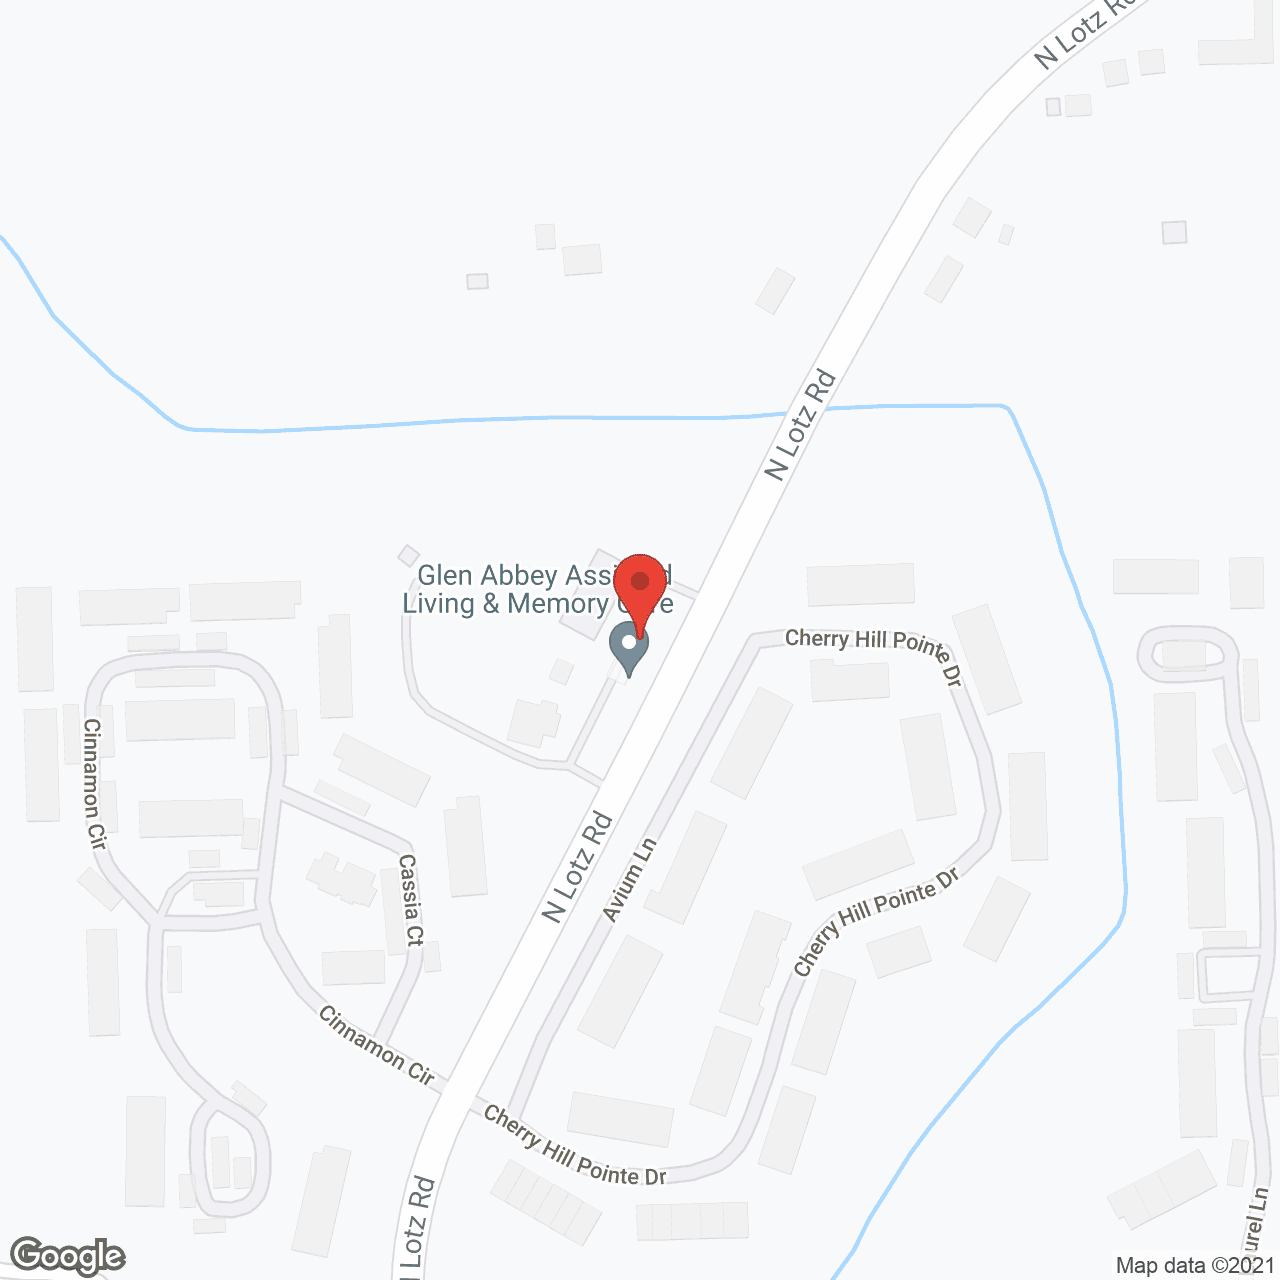 Glen Abbey Assisted Living and Memory Care in google map